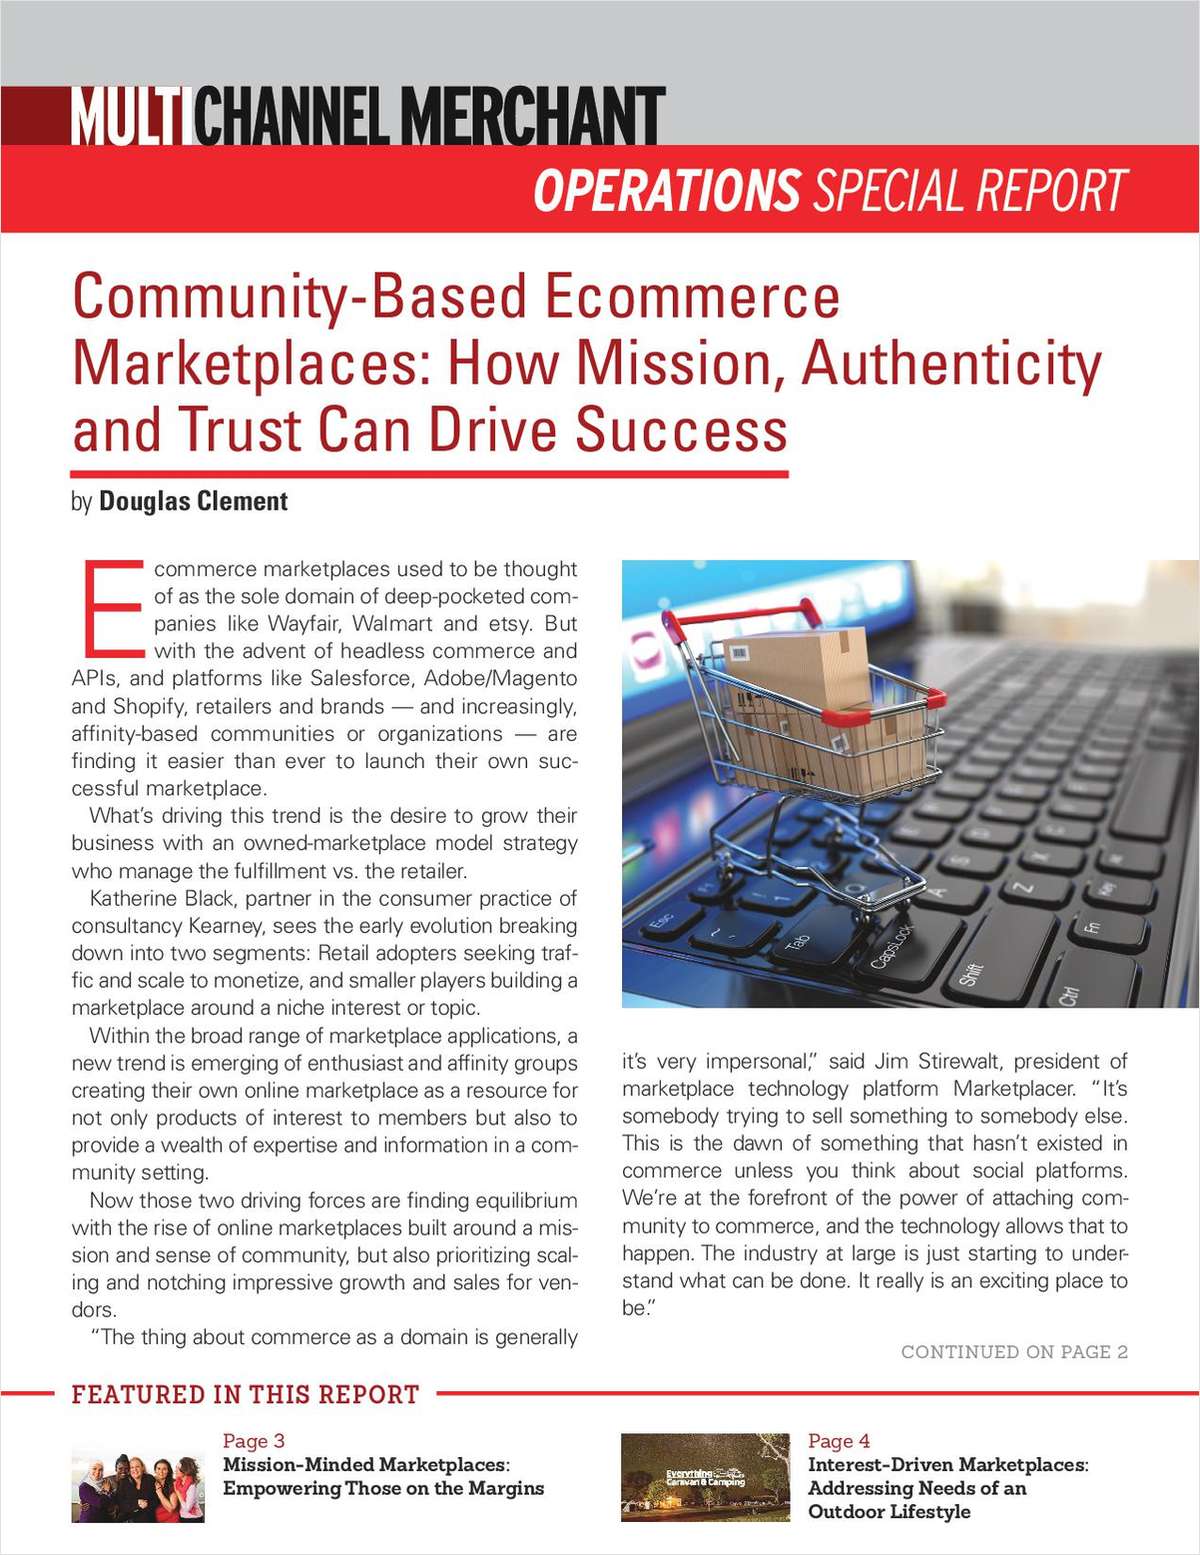 Community-Based Ecommerce Marketplaces: How Mission, Authenticity and Trust Can Drive Success